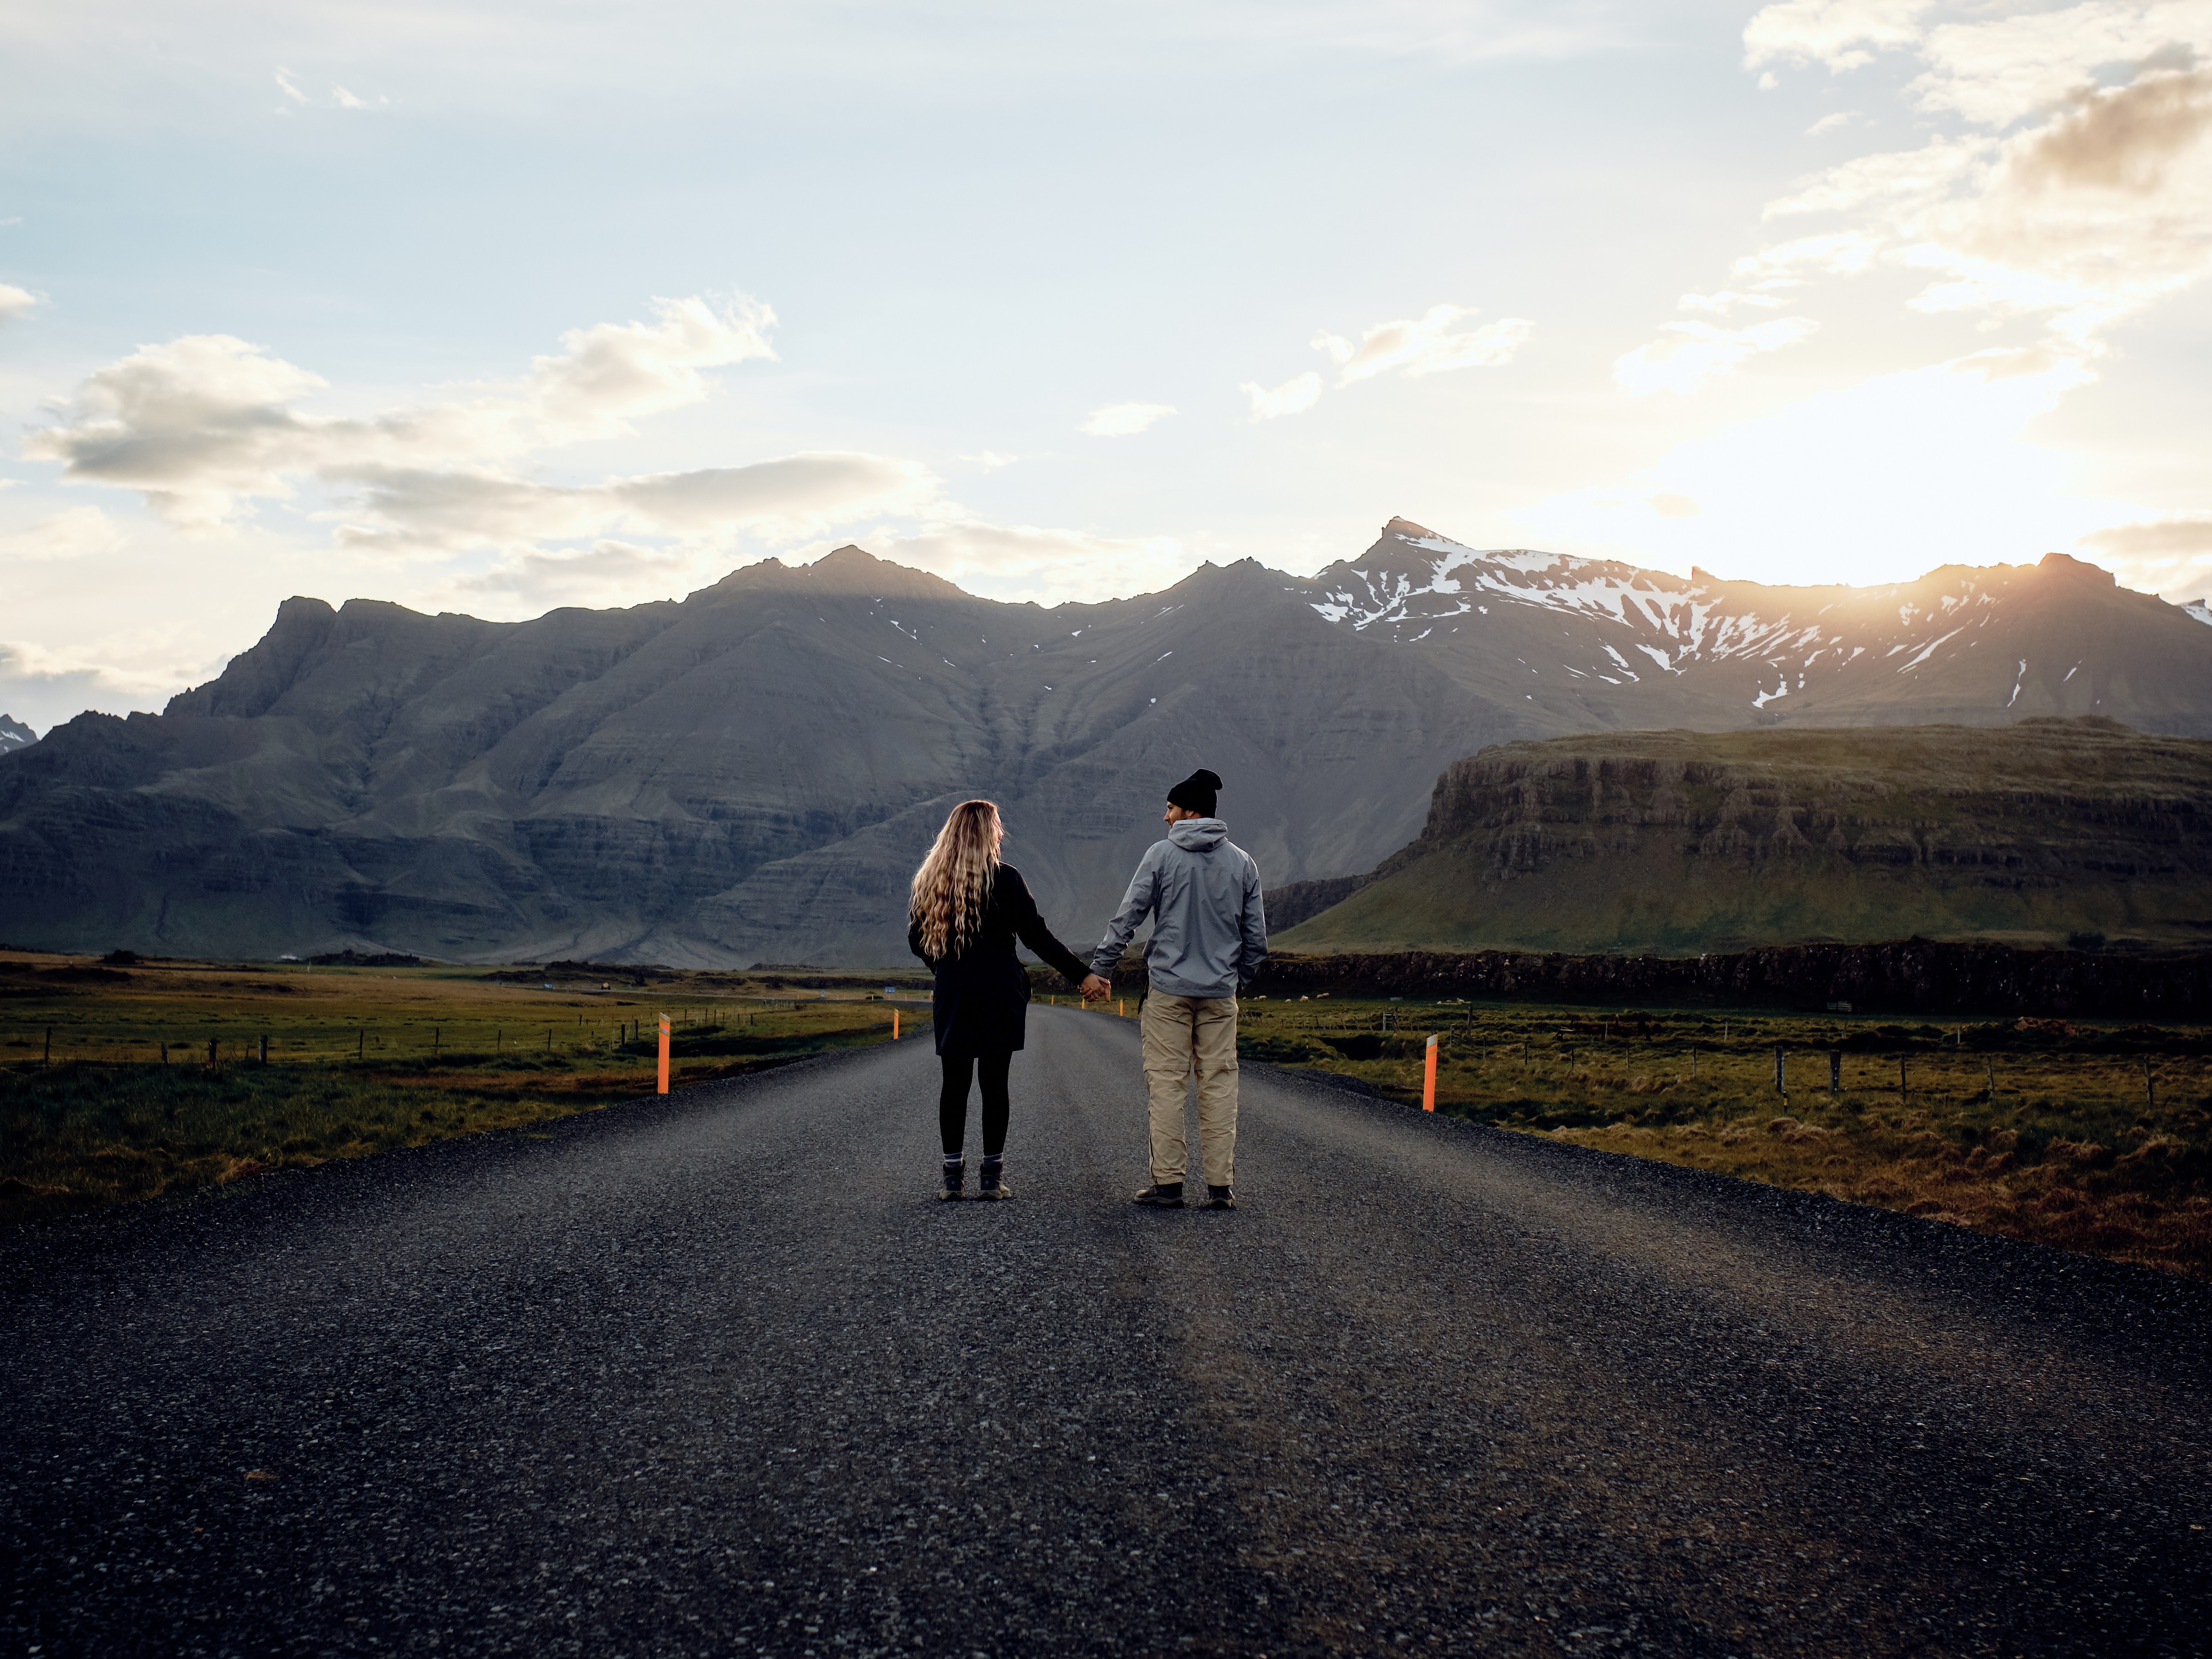 Phone Wallpaper (No watermarks) romance, love, mountains, road